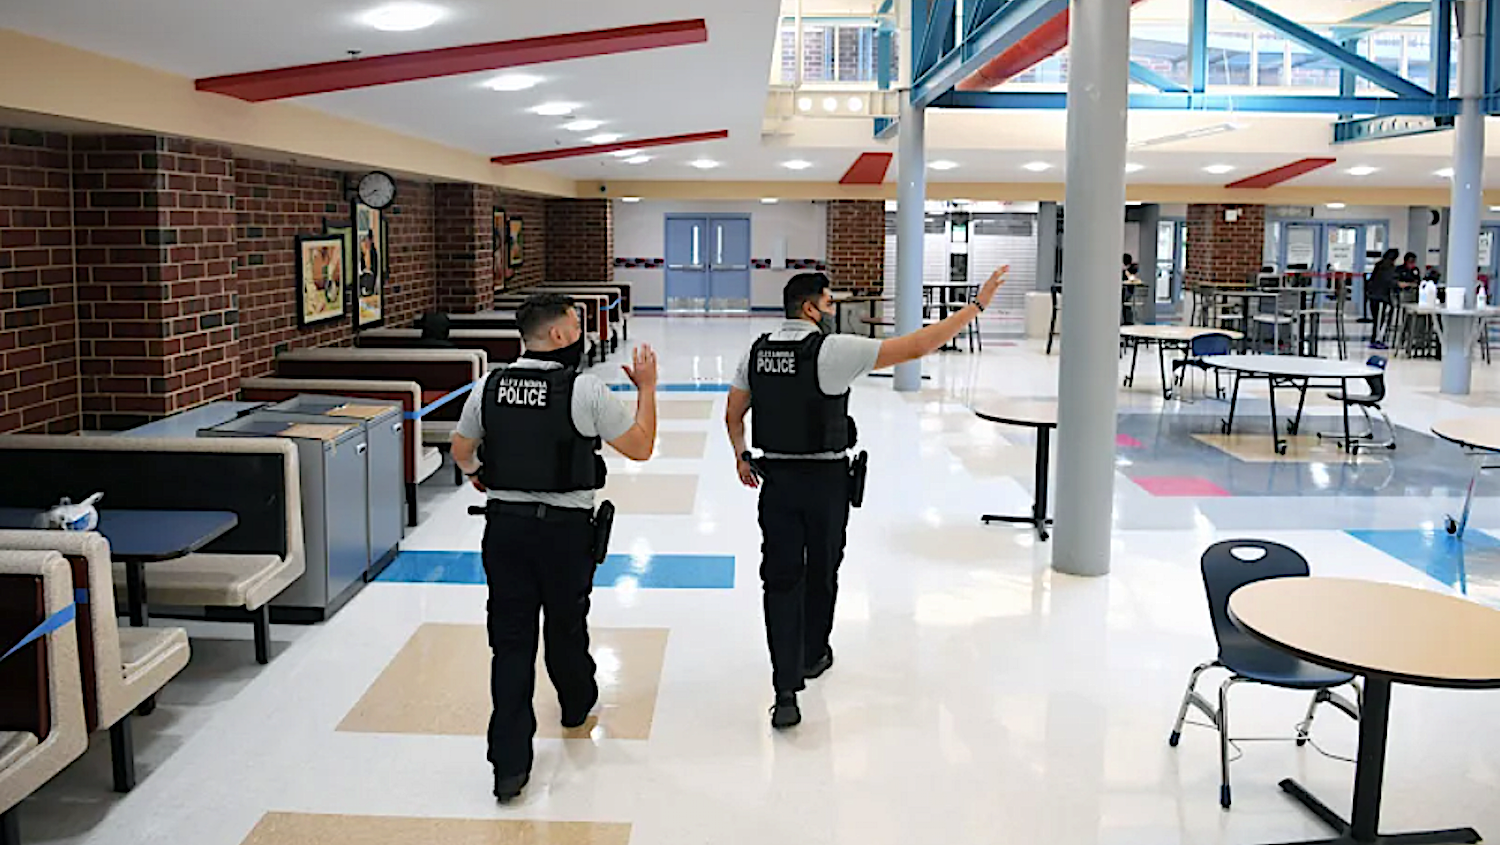 two school police officers in campus cafeteria